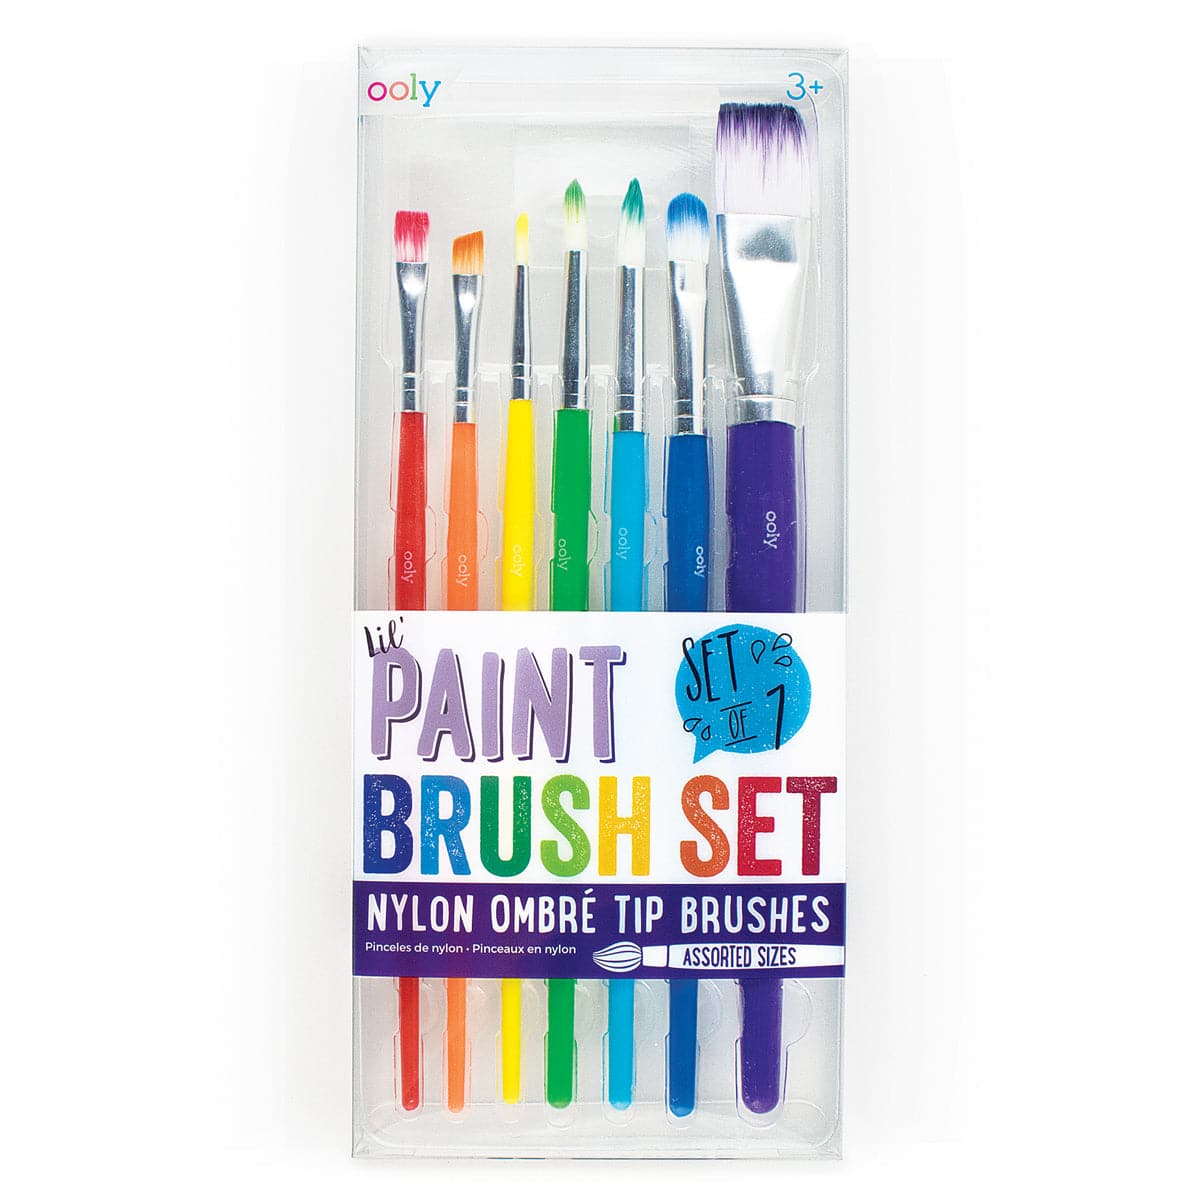 Ooly-Lil' Paint Brushes - Set of 7-126-005-Legacy Toys